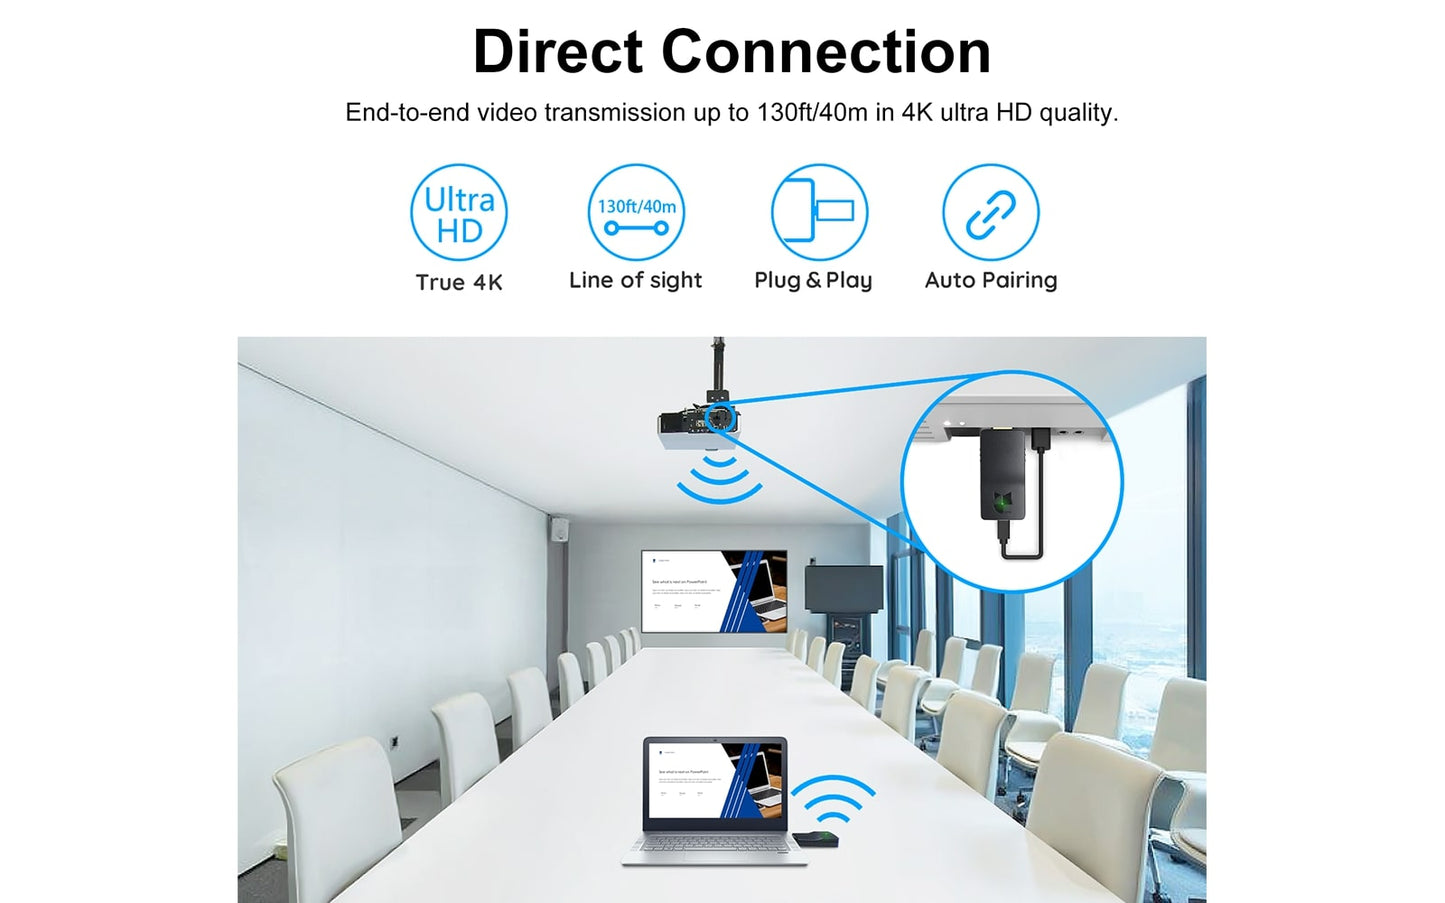 whe-20 wireless hdmi extender receiver-direct connection